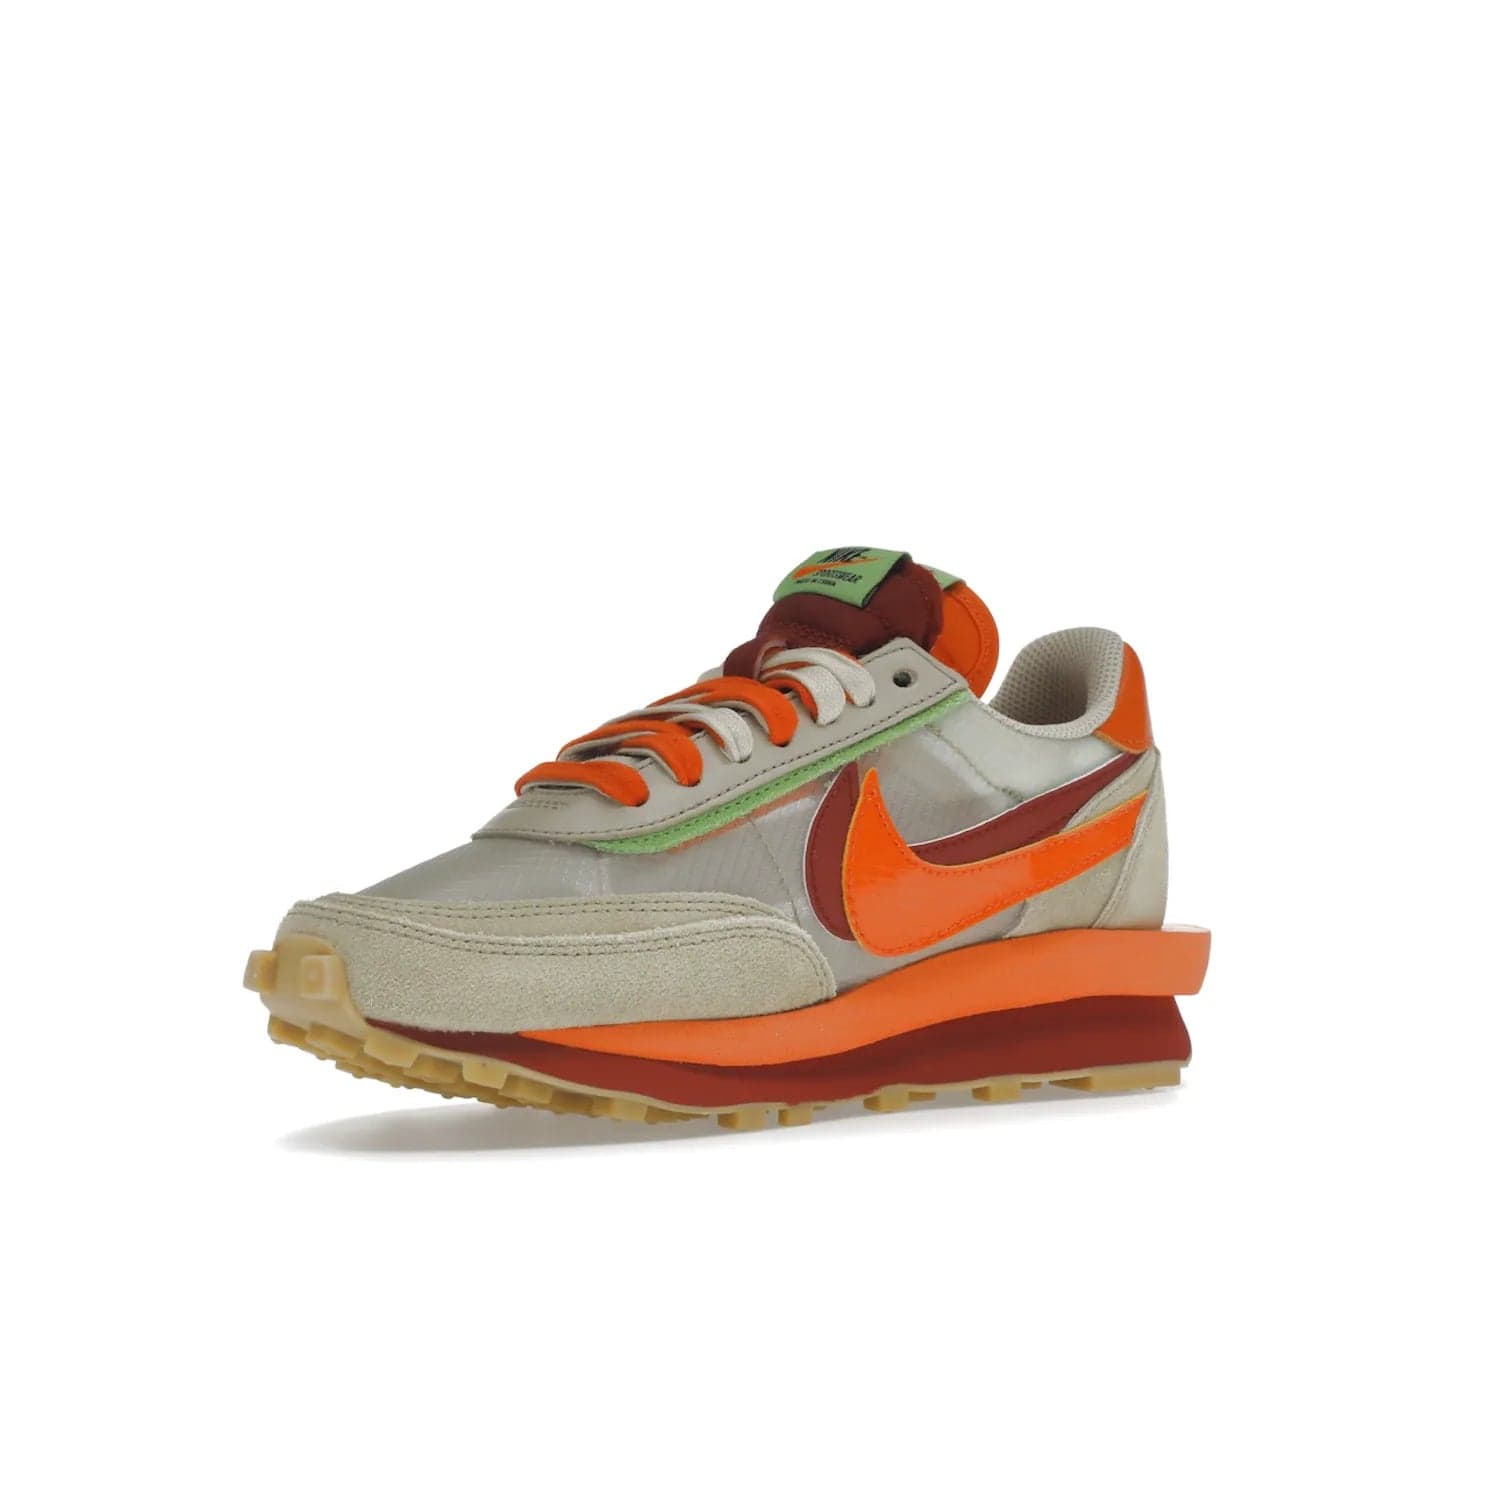 Nike LD Waffle sacai CLOT Kiss of Death Net Orange Blaze - Image 15 - Only at www.BallersClubKickz.com - A bold and stylish Nike LD Waffle sacai CLOT Kiss of Death Net Orange Blaze sneaker featuring a unique off-white, Deep Red & Orange Blaze Swooshes, two-toned stacked sole and doubled tongue. Available in September 2021. Make a statement.